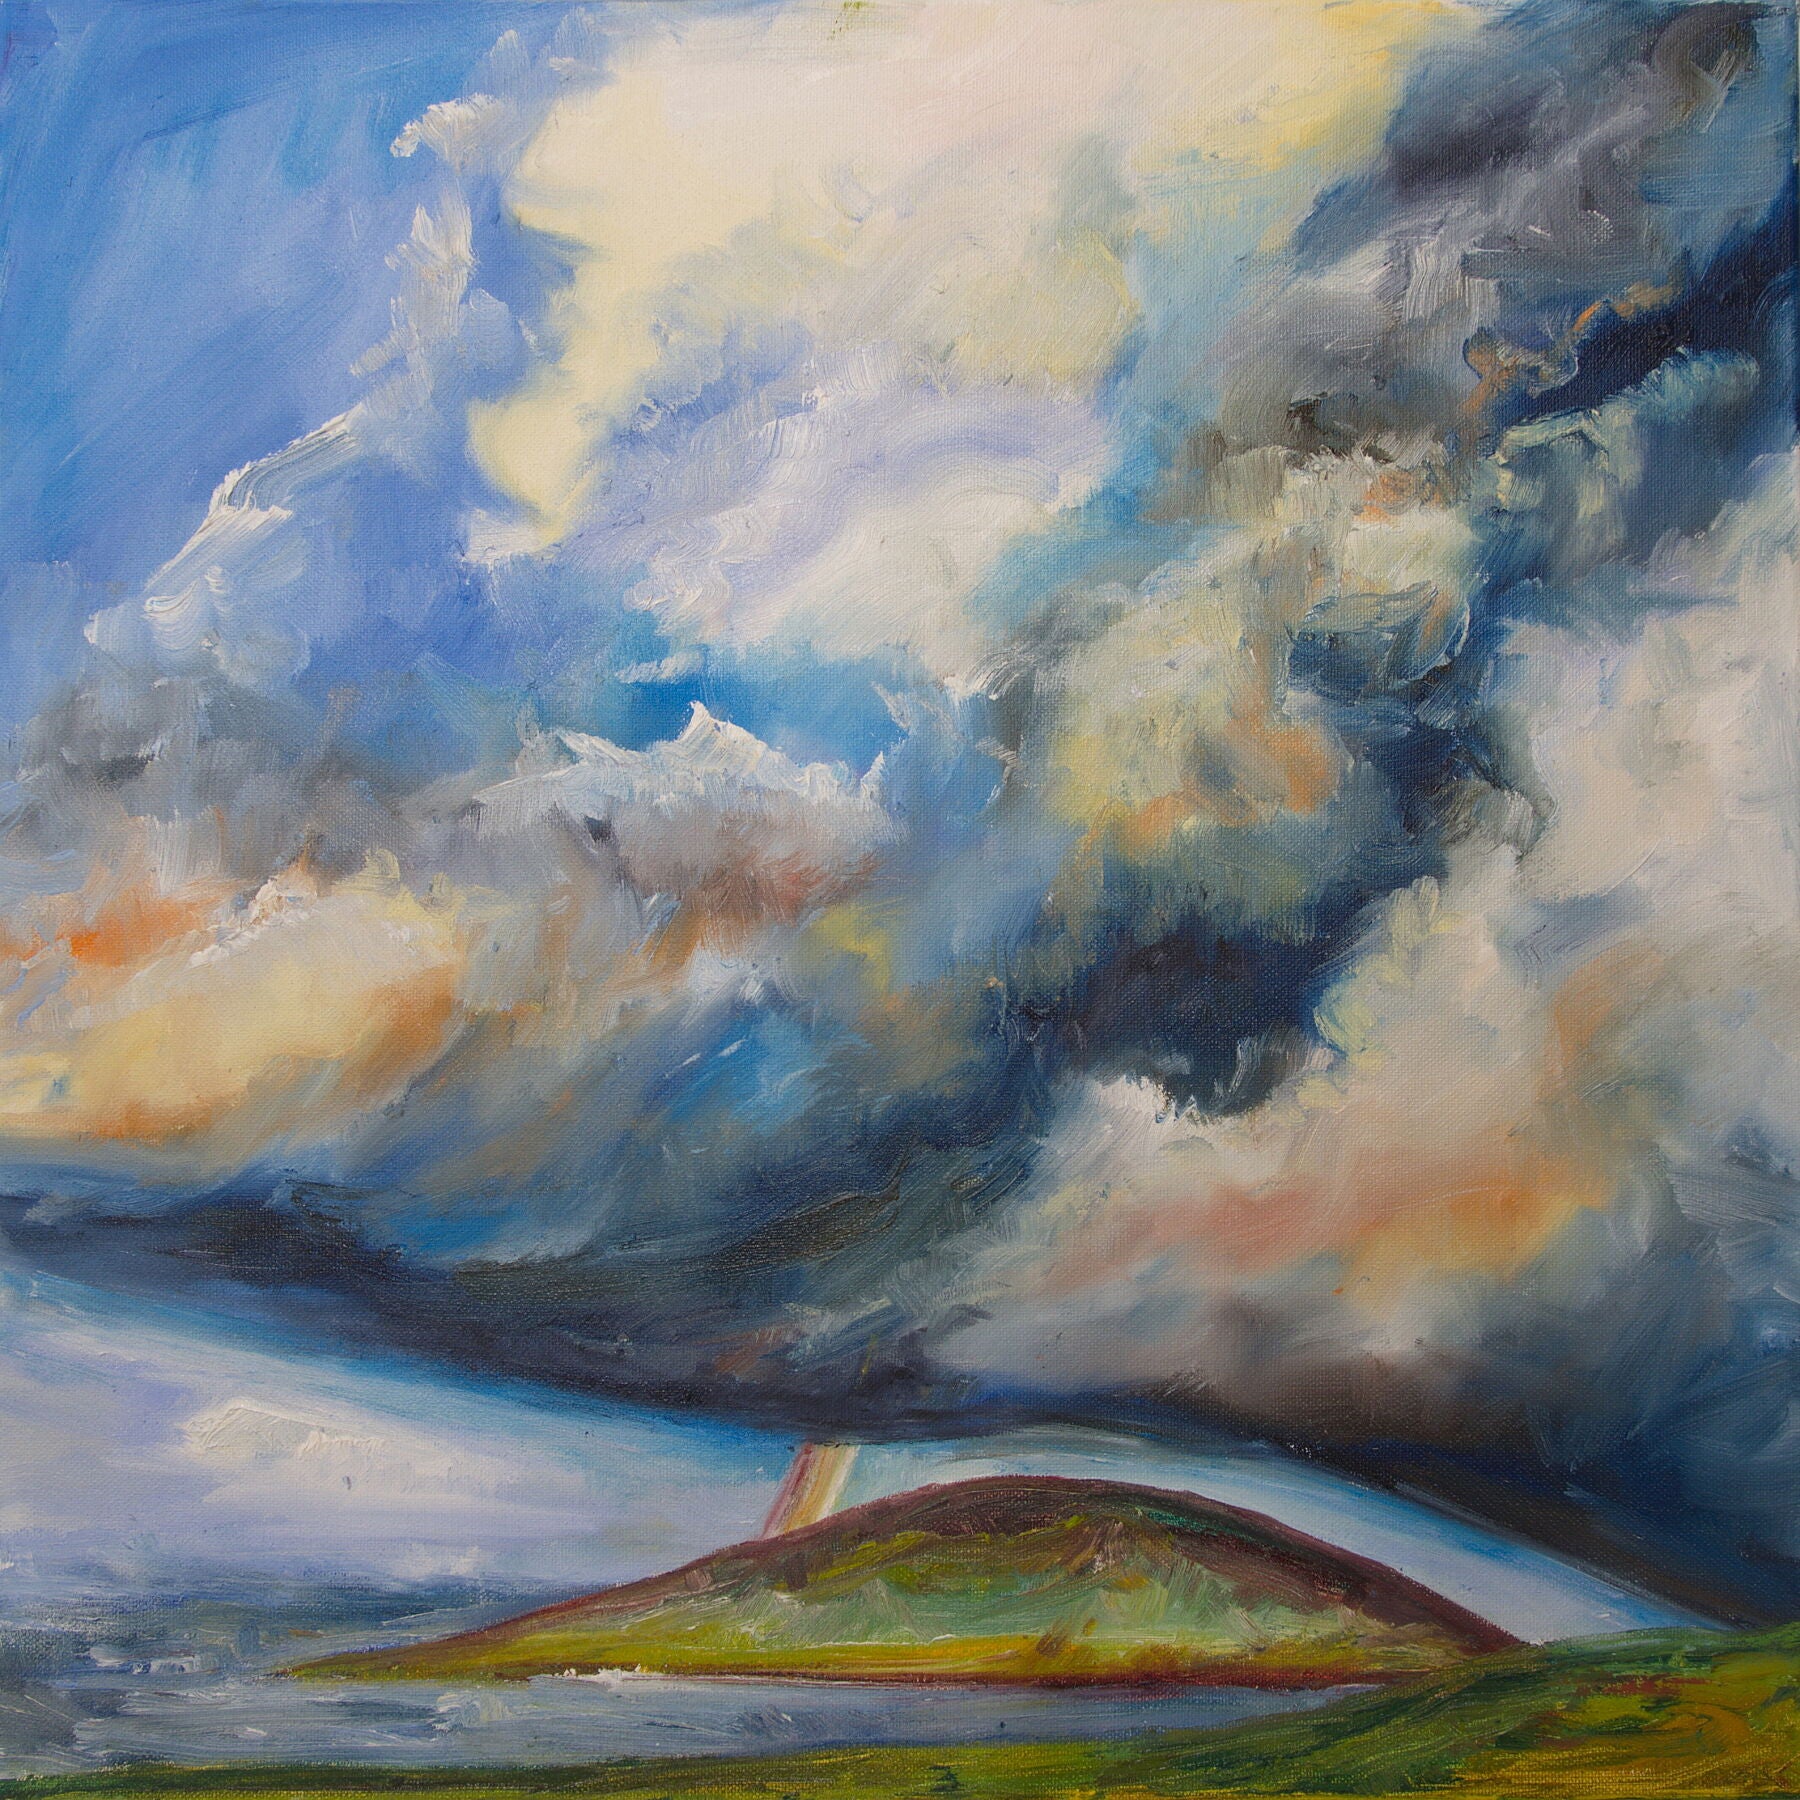 print of Gairsay island under clouds and rainbow Orkney Scotland  by Jeanne Bouza Rose